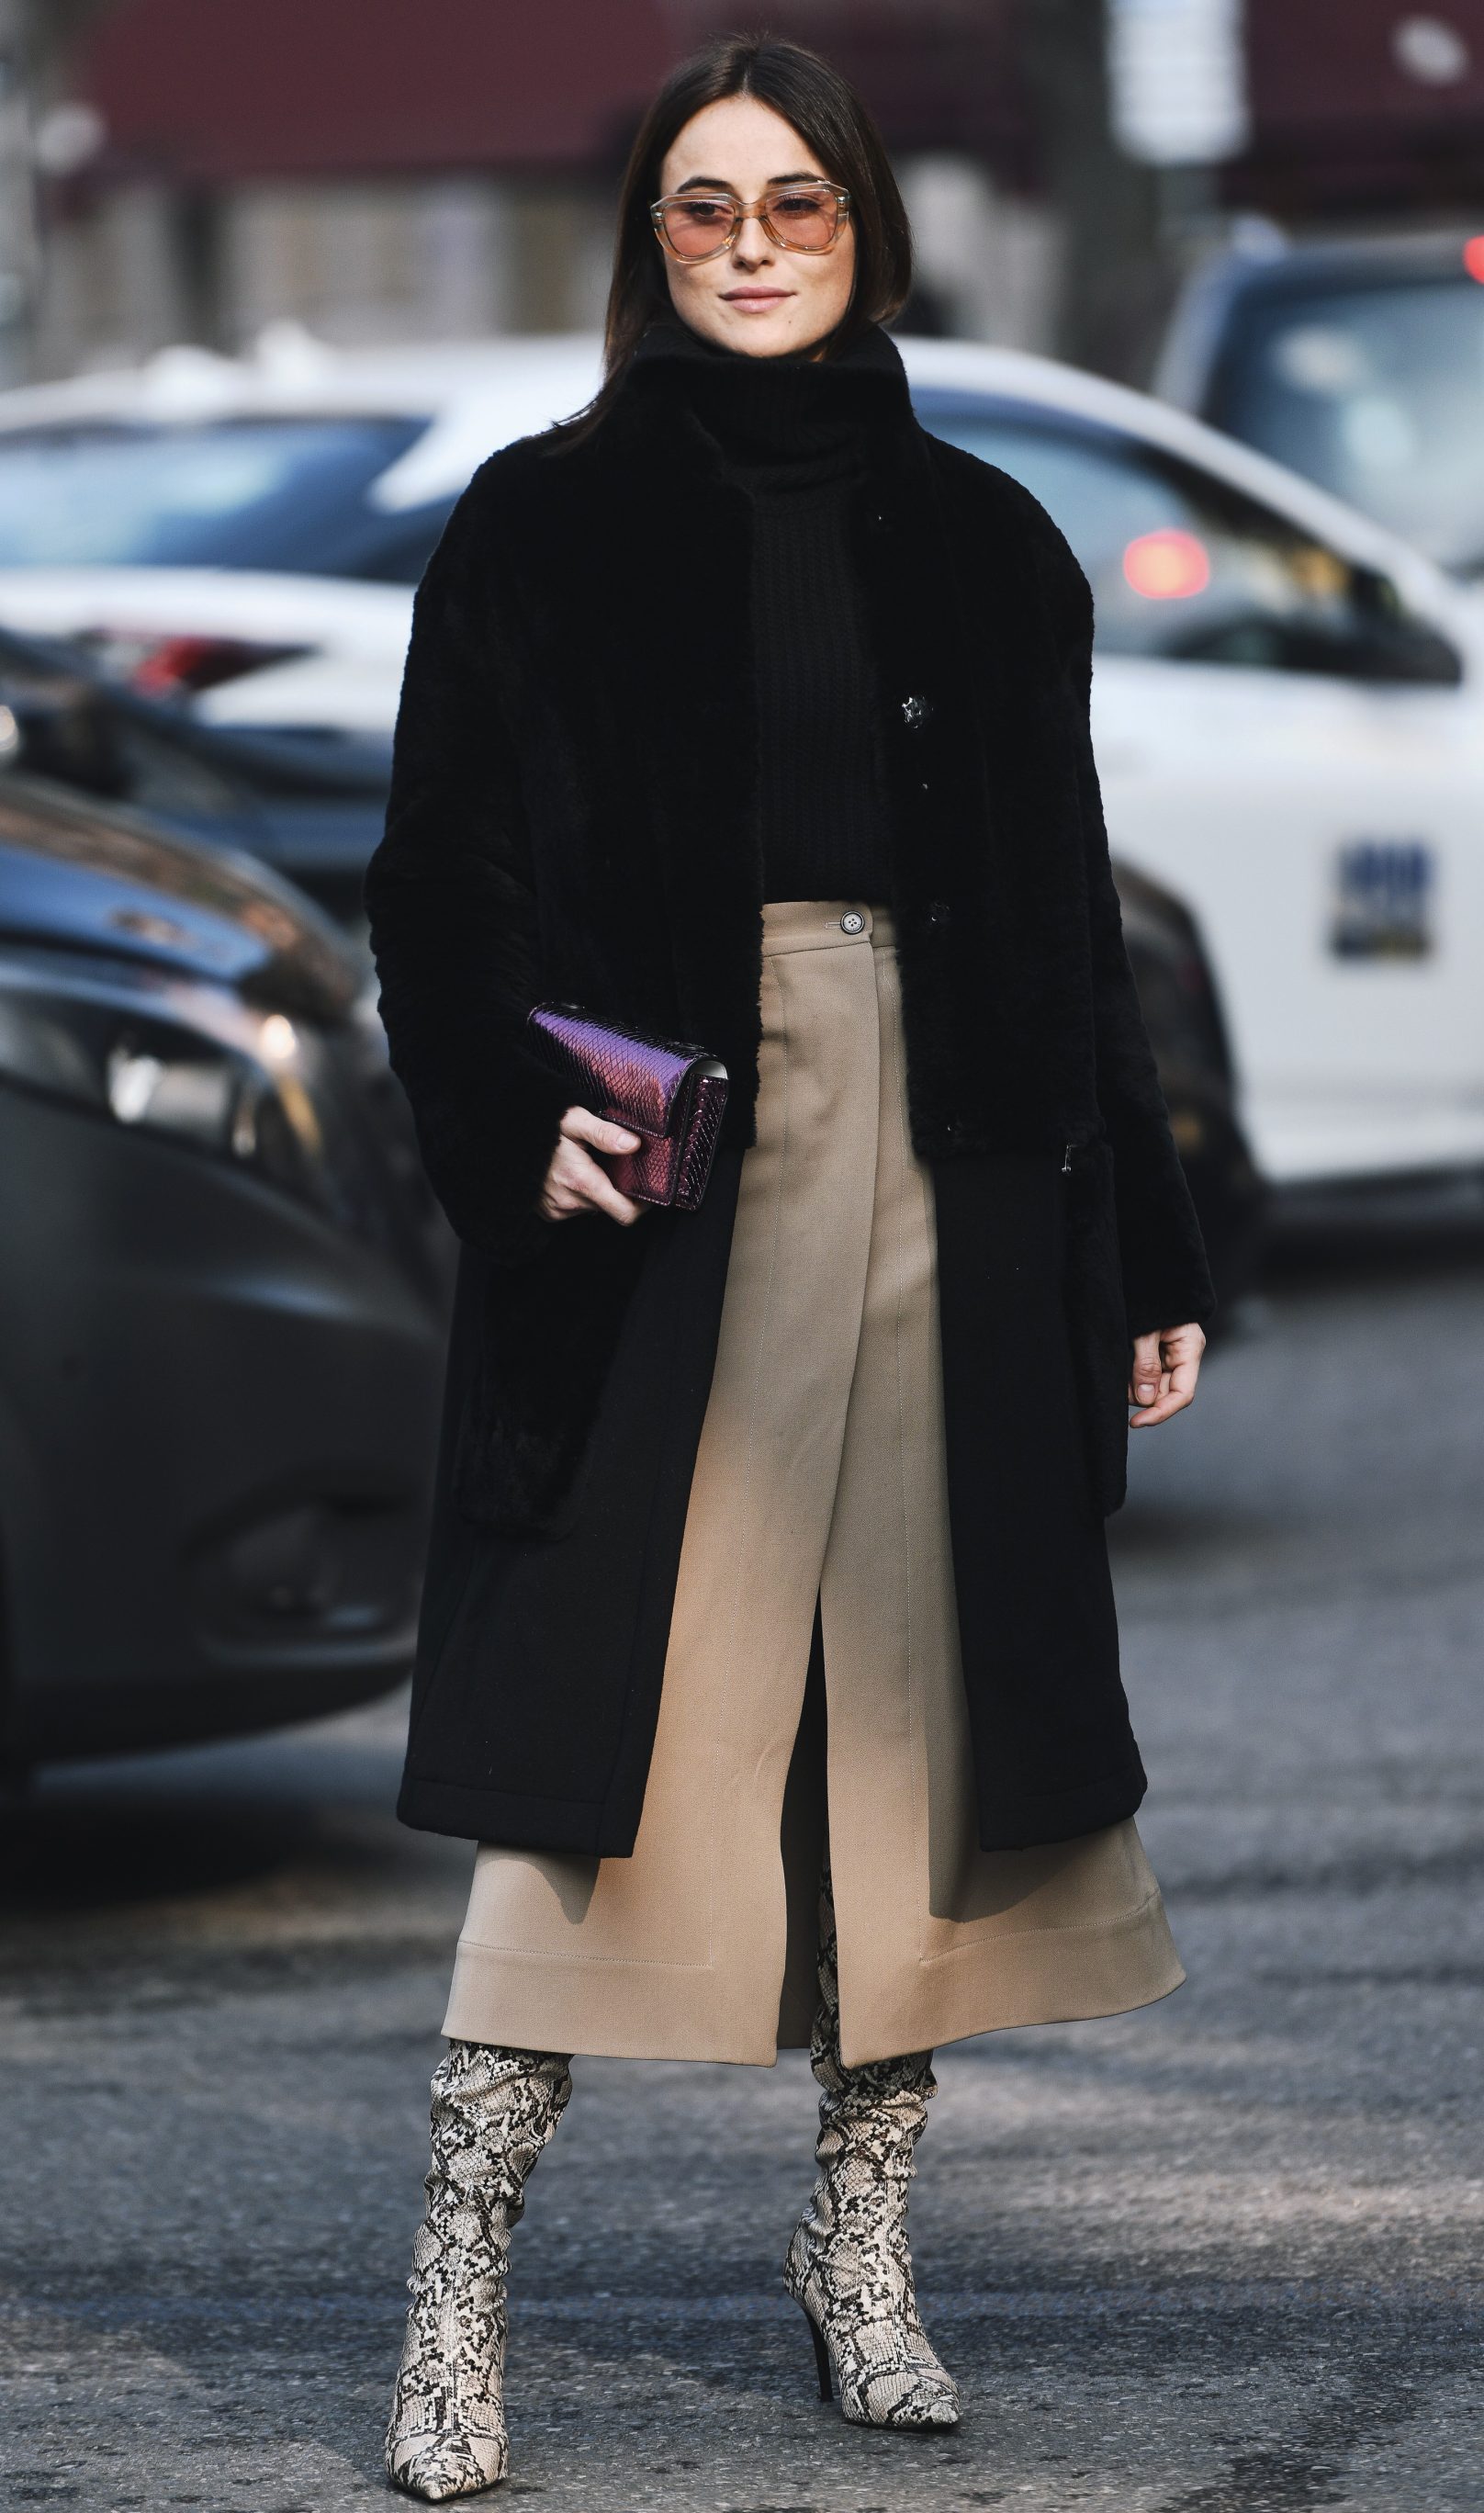 Long Light-Colored Skirt Styled with The Printed Boots, Black Sweater and Long Dark Coat